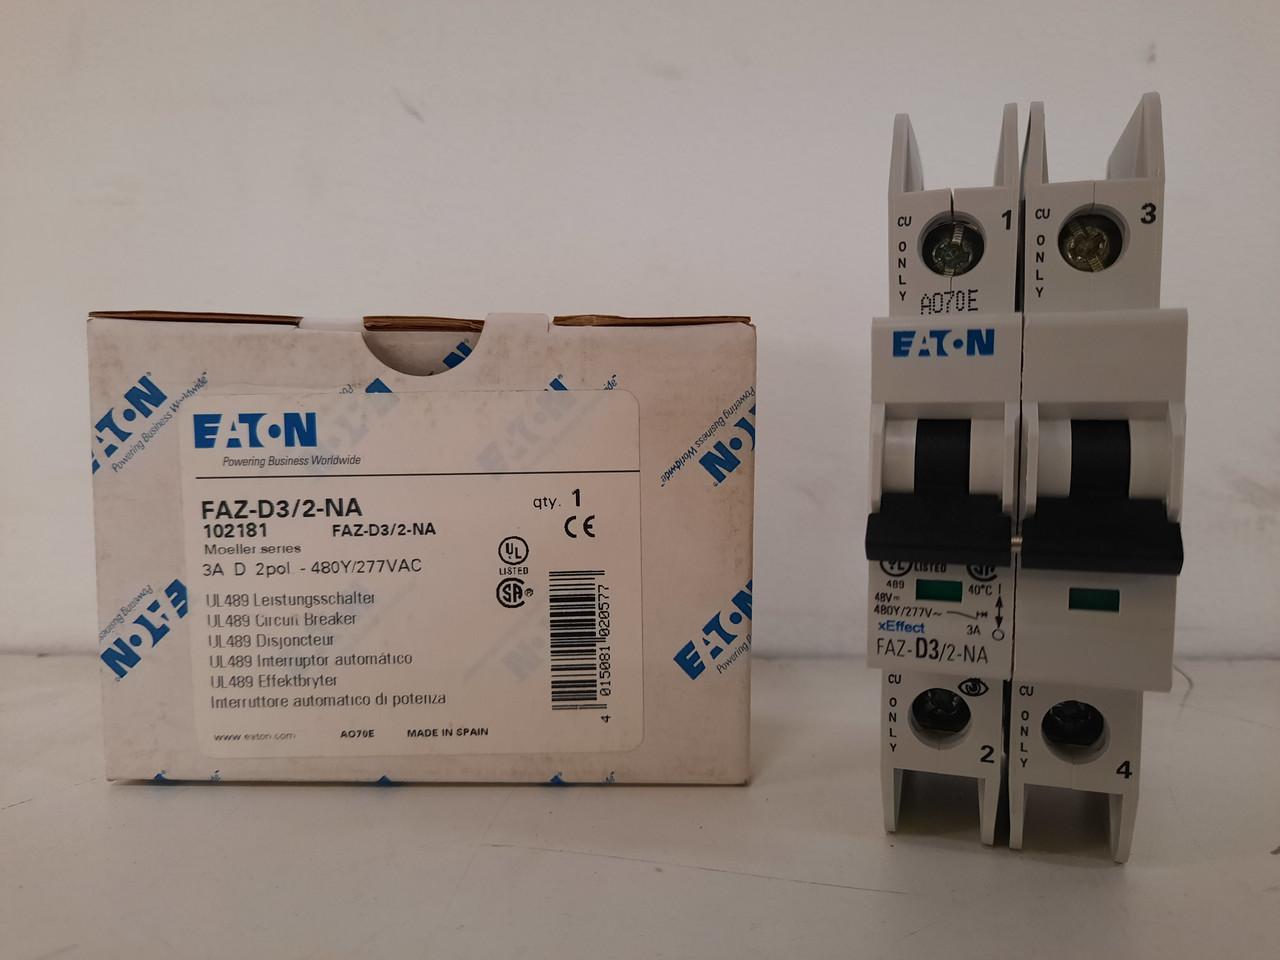 Eaton FAZ-D3/2-NA 277/480 VAC, 96 VDC, 3 A, 10 kA, 10 to 20 x Rated Current, 2-Pole, Screw Terminal, DIN Rail Mount, Current Limiting, Thermal Magnetic